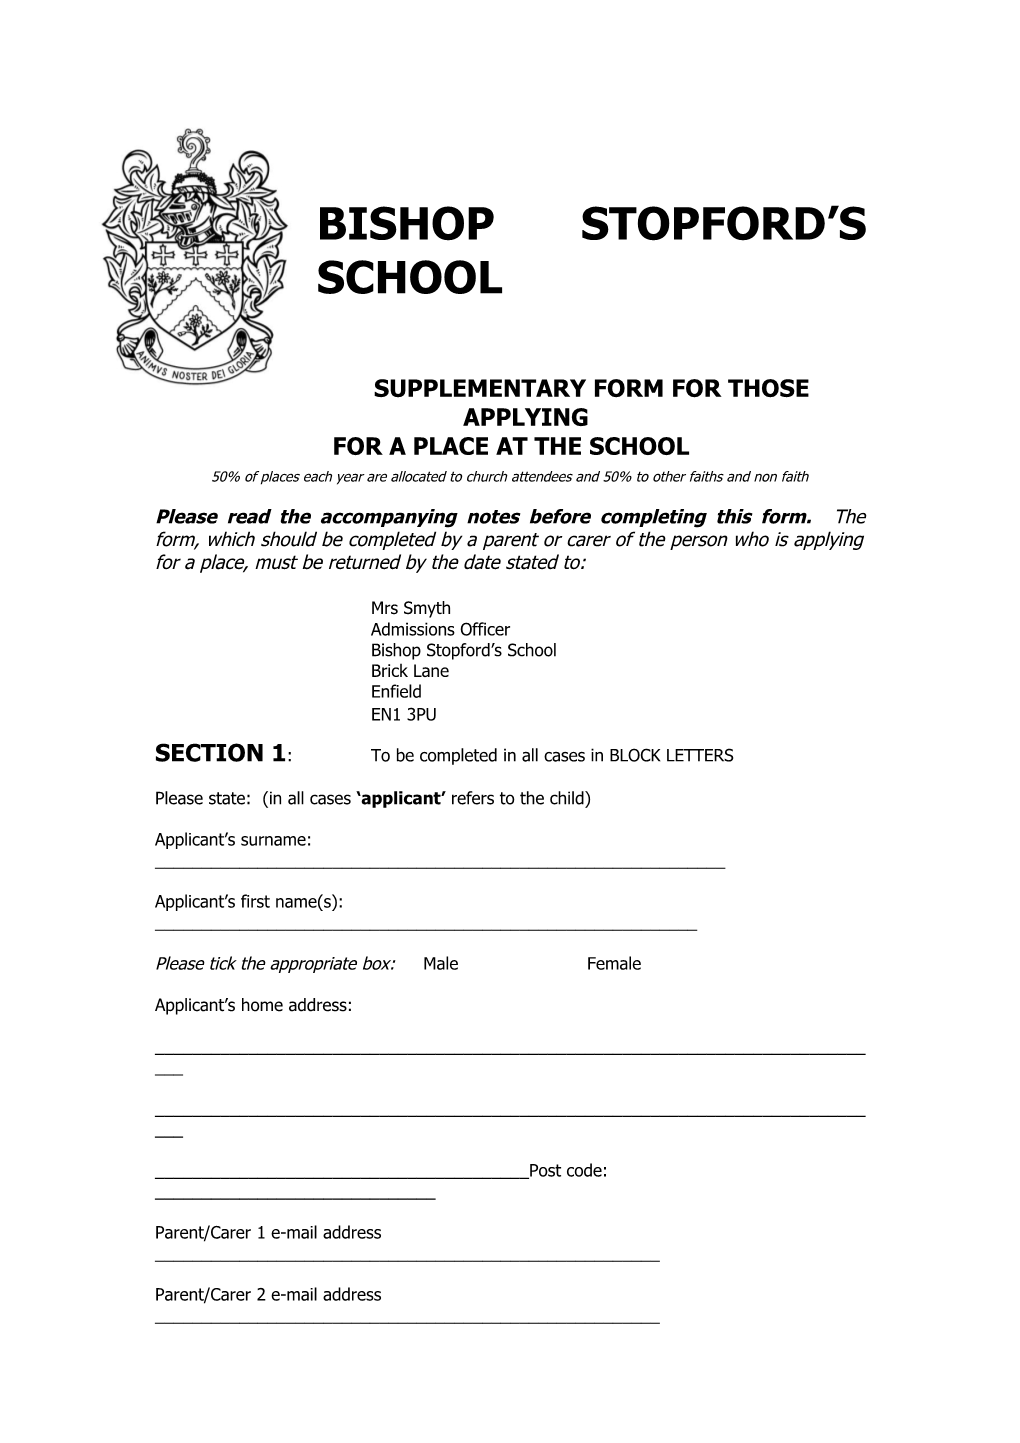 Supplementary Form for Those Applying